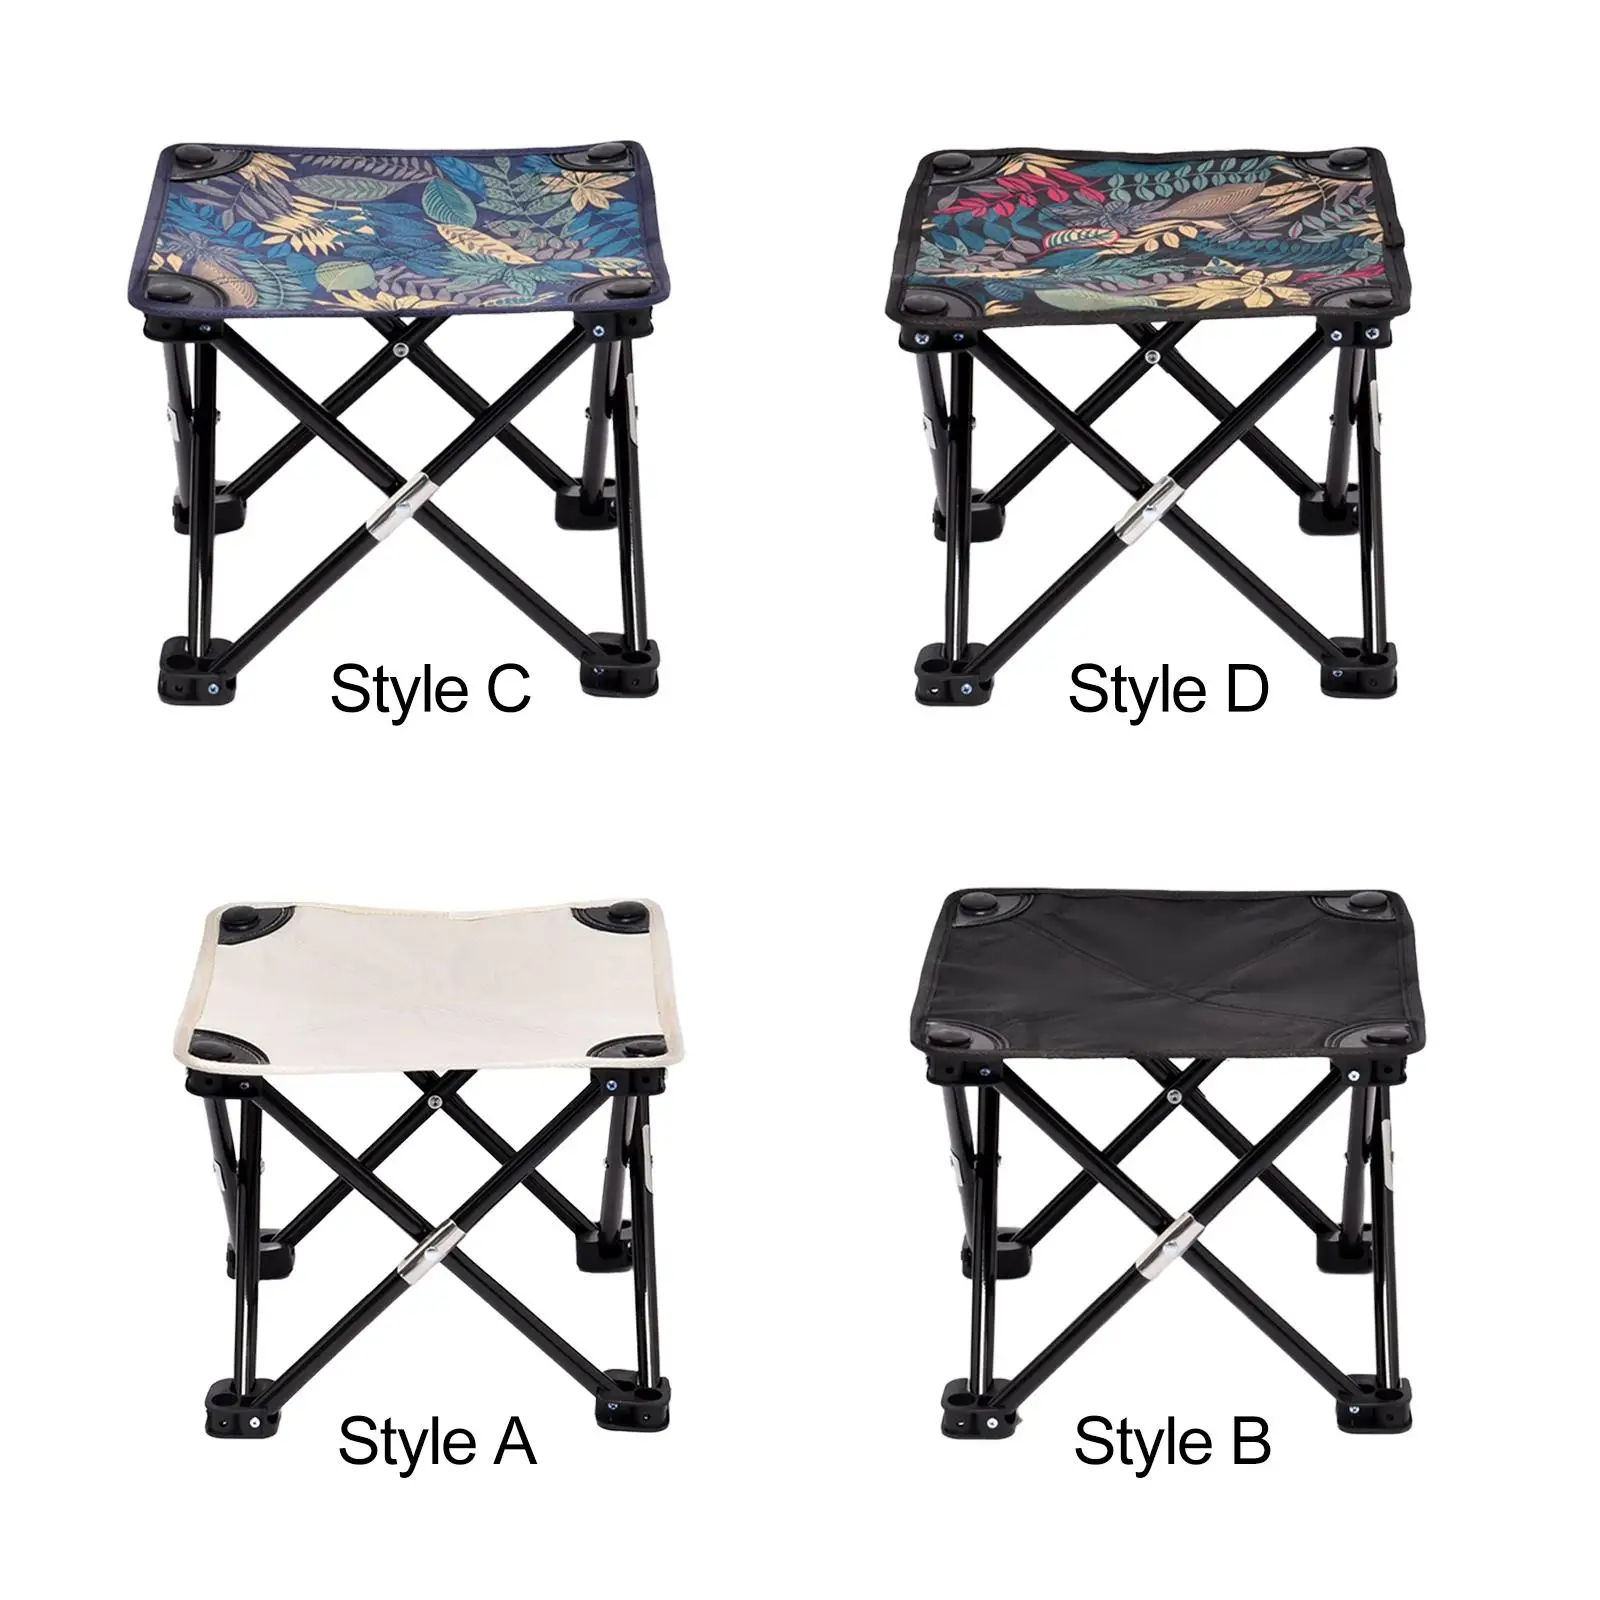 Folding Stool recliner Chair Ottoman Aluminum Alloy Seat Collapsible Stool Fishing Chairs for Patio Travel Lounge Picnic Hiking